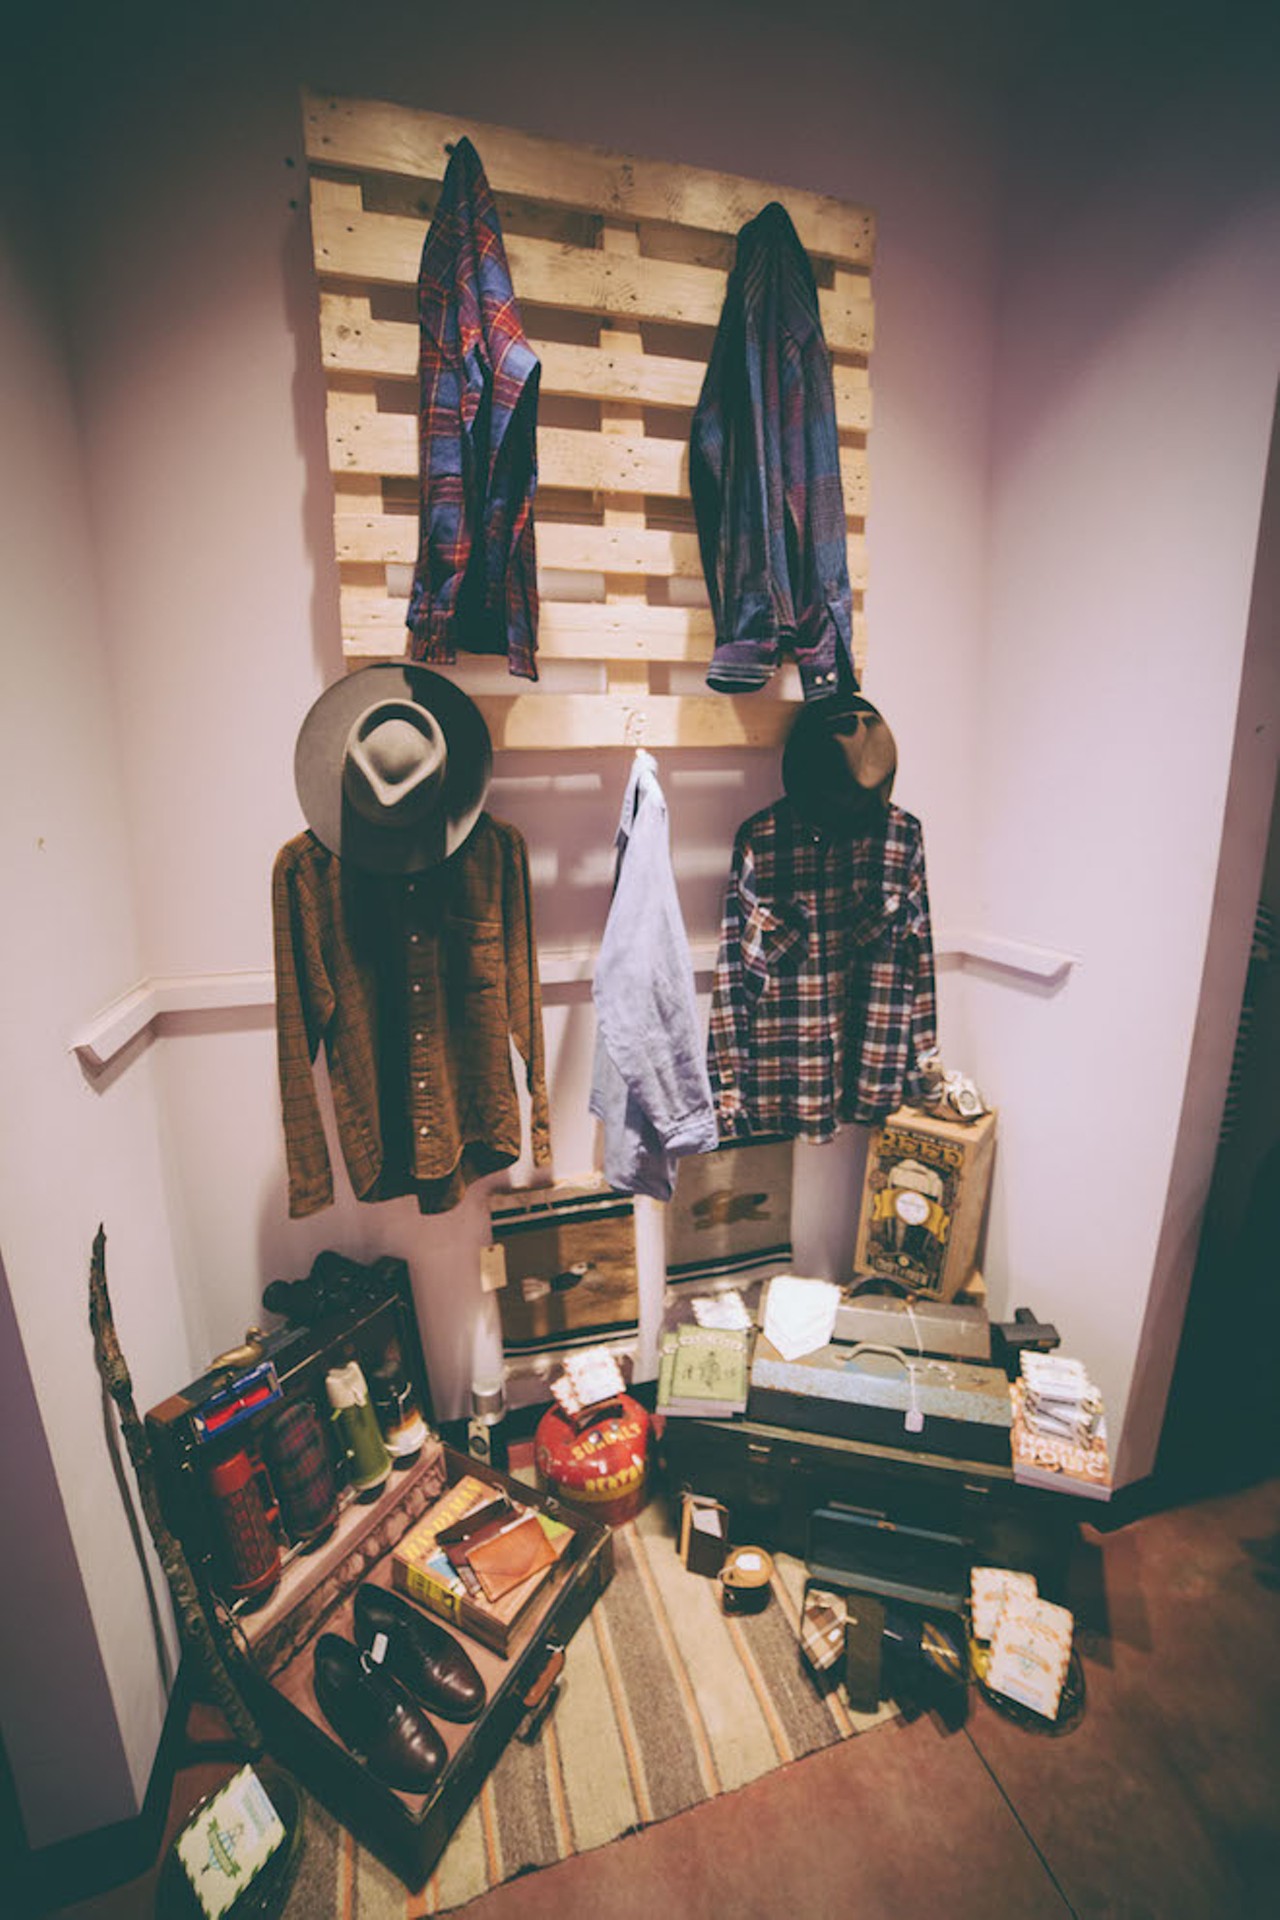 50 fantastic photos from the Daily City Pop-up Shop